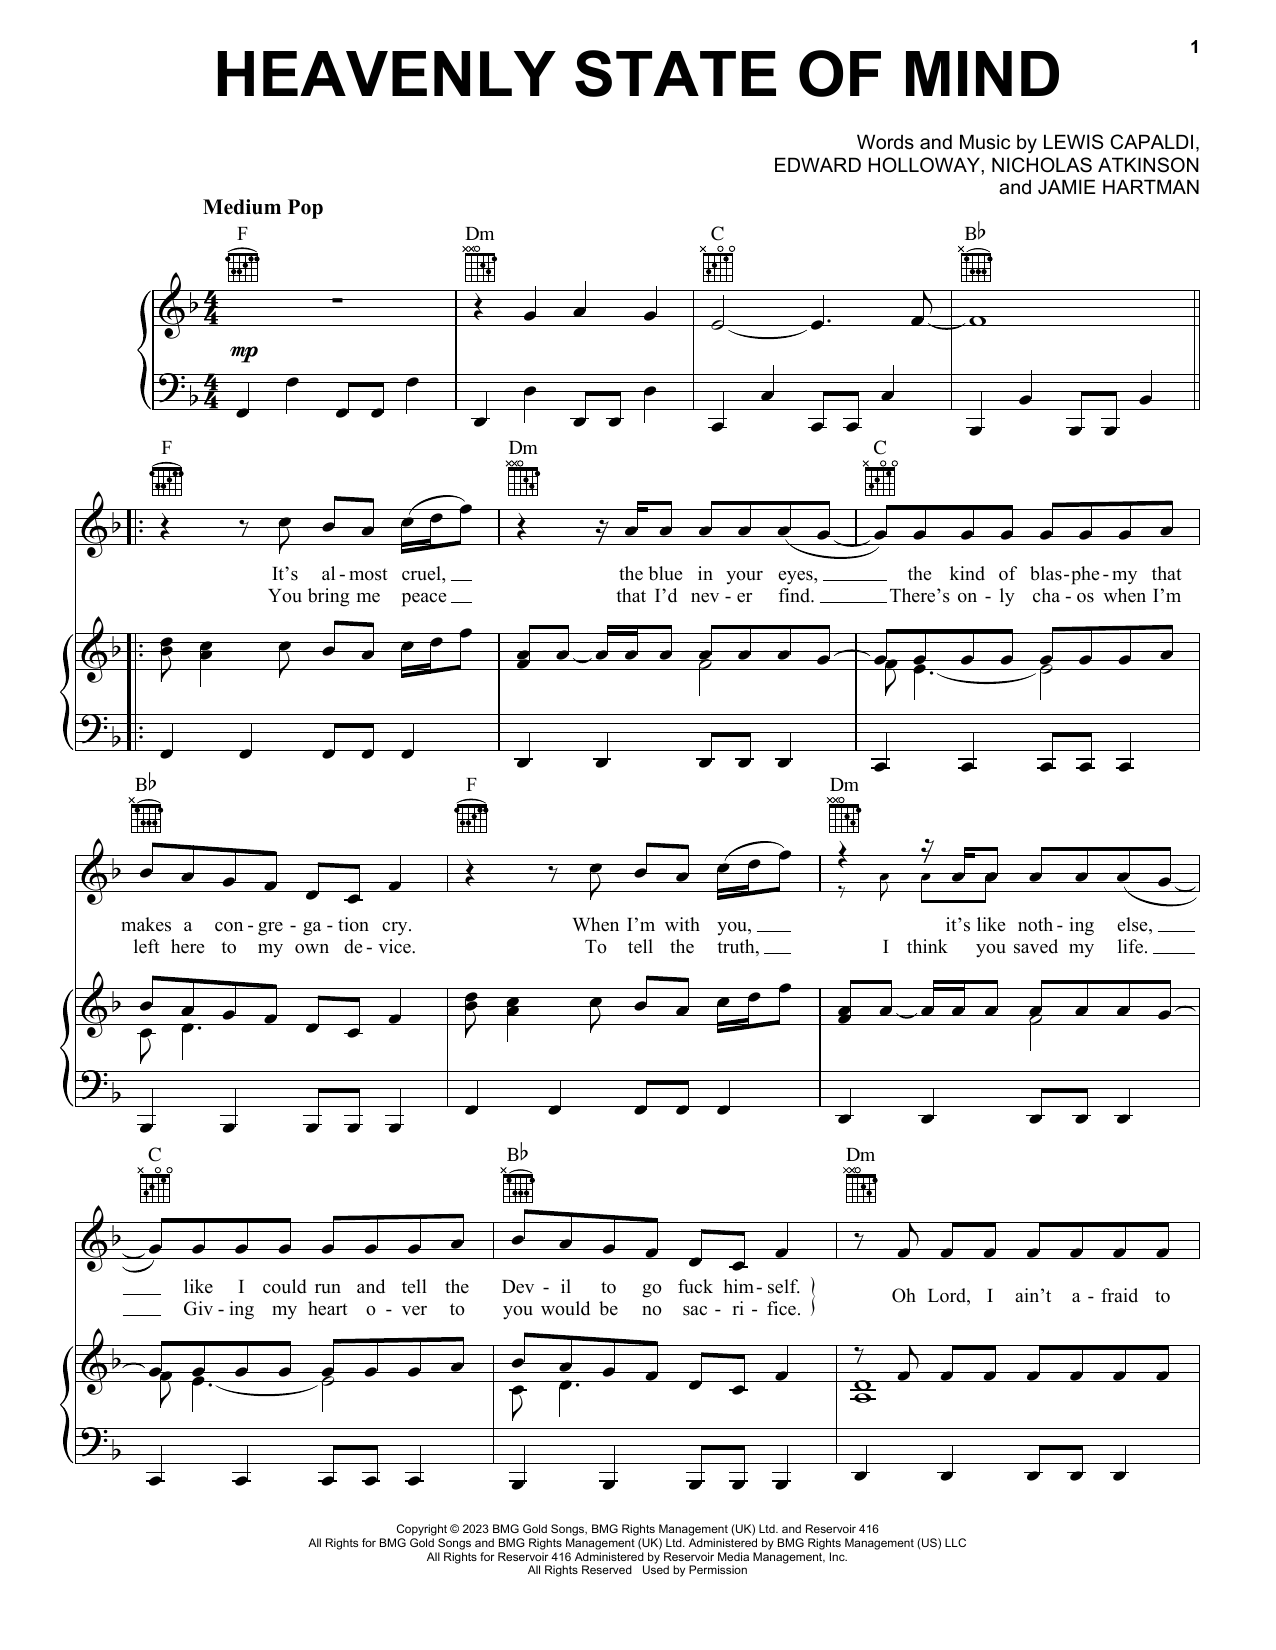 Download Lewis Capaldi Heavenly Kind Of State Of Mind Sheet Music